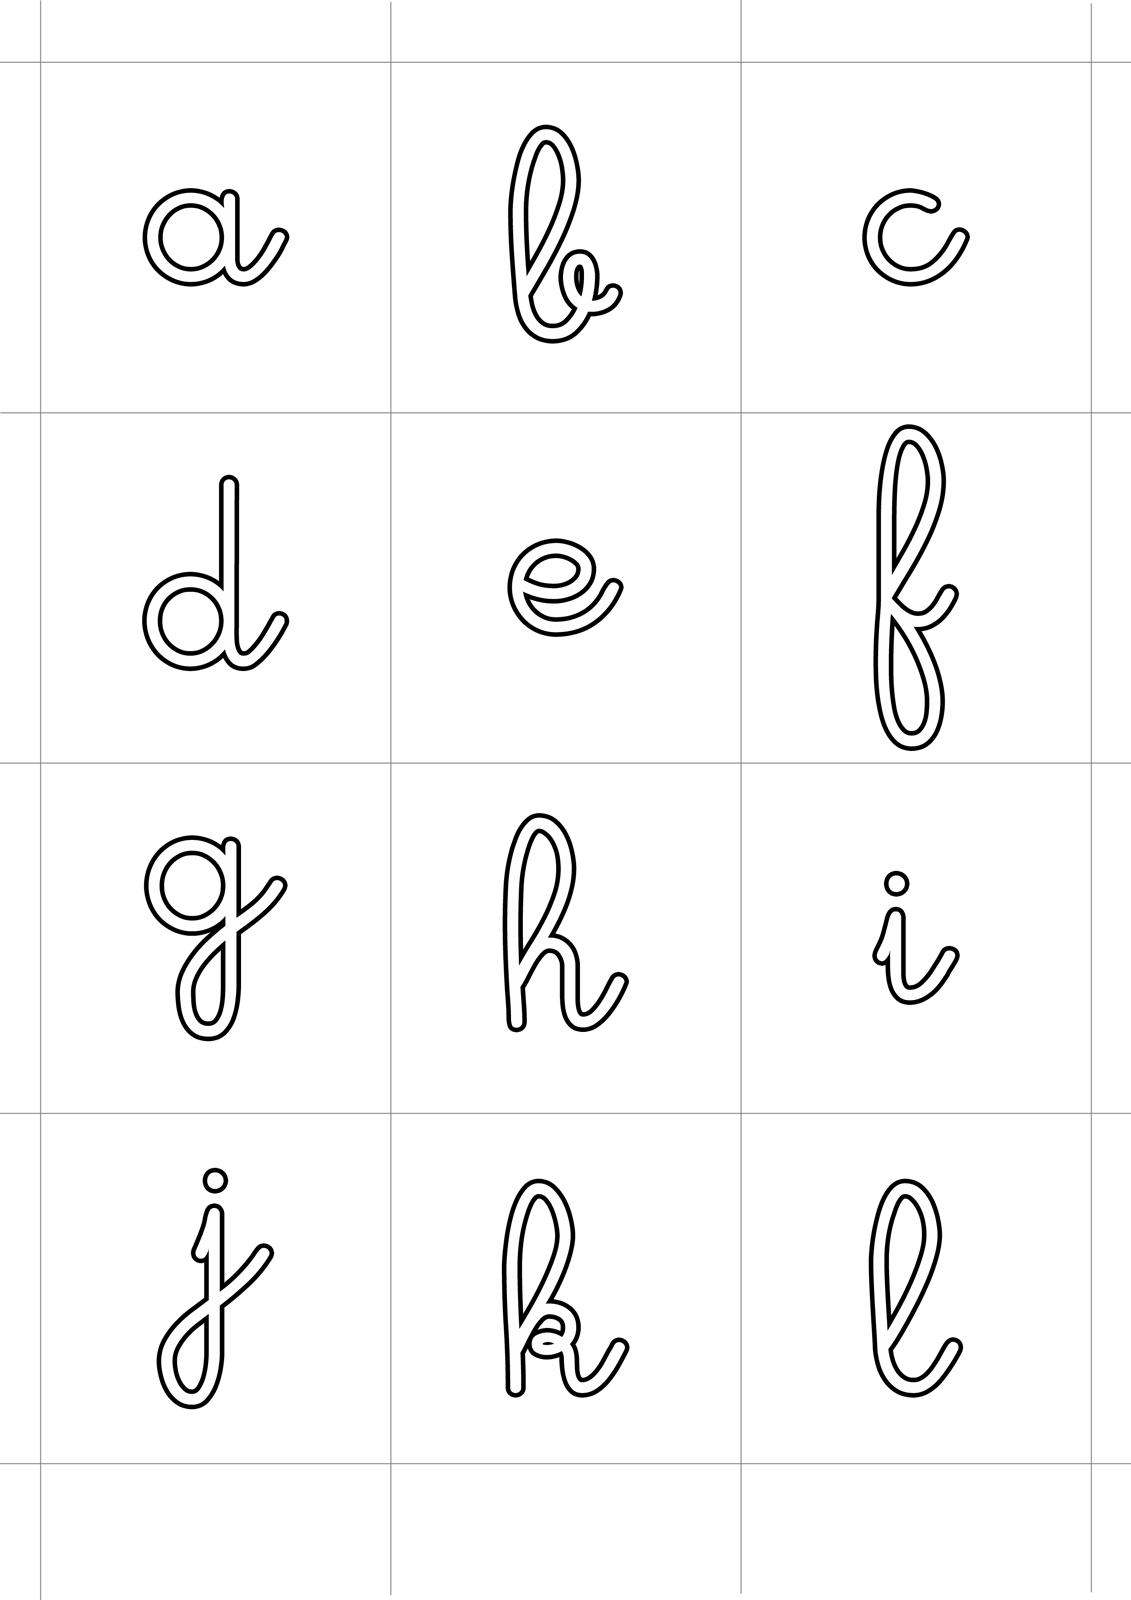 Letters and numbers - Cursive lowercase letters from a to l